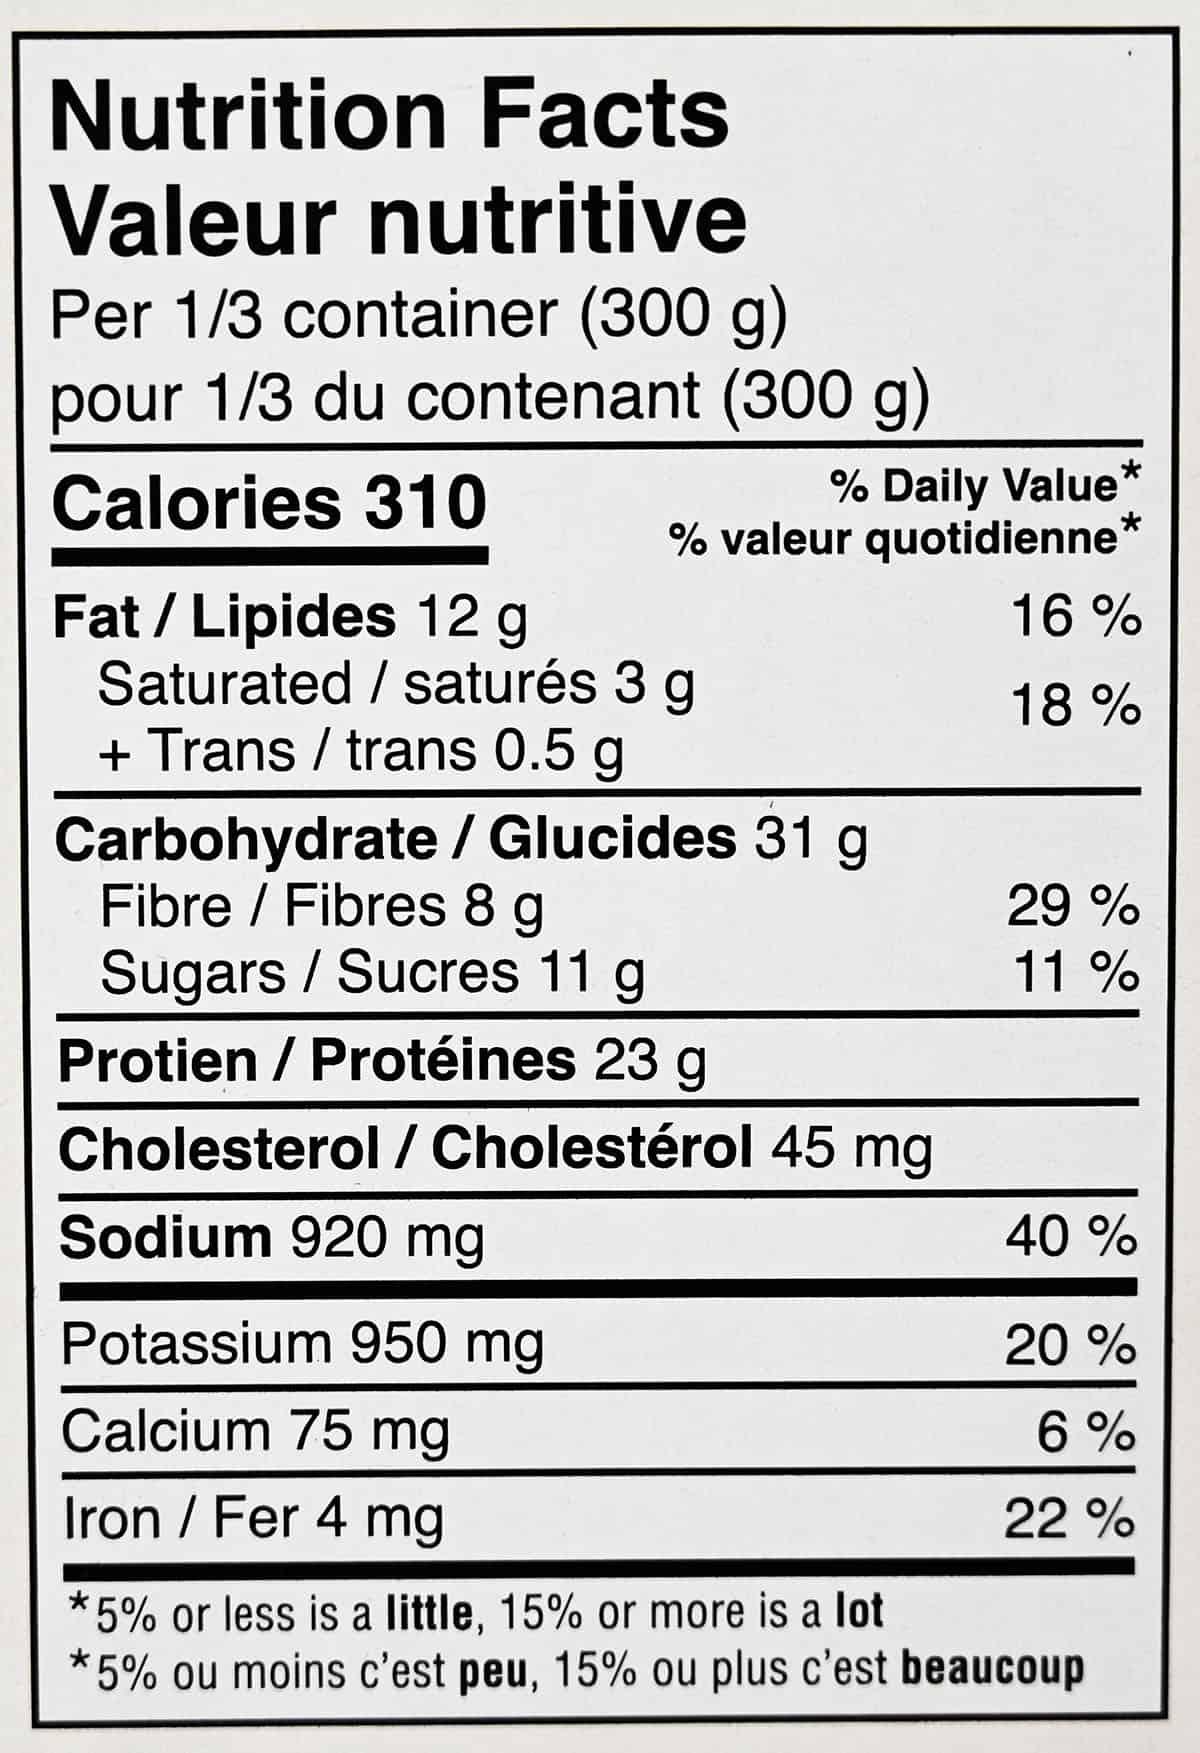 Chili nutrition facts from the package.